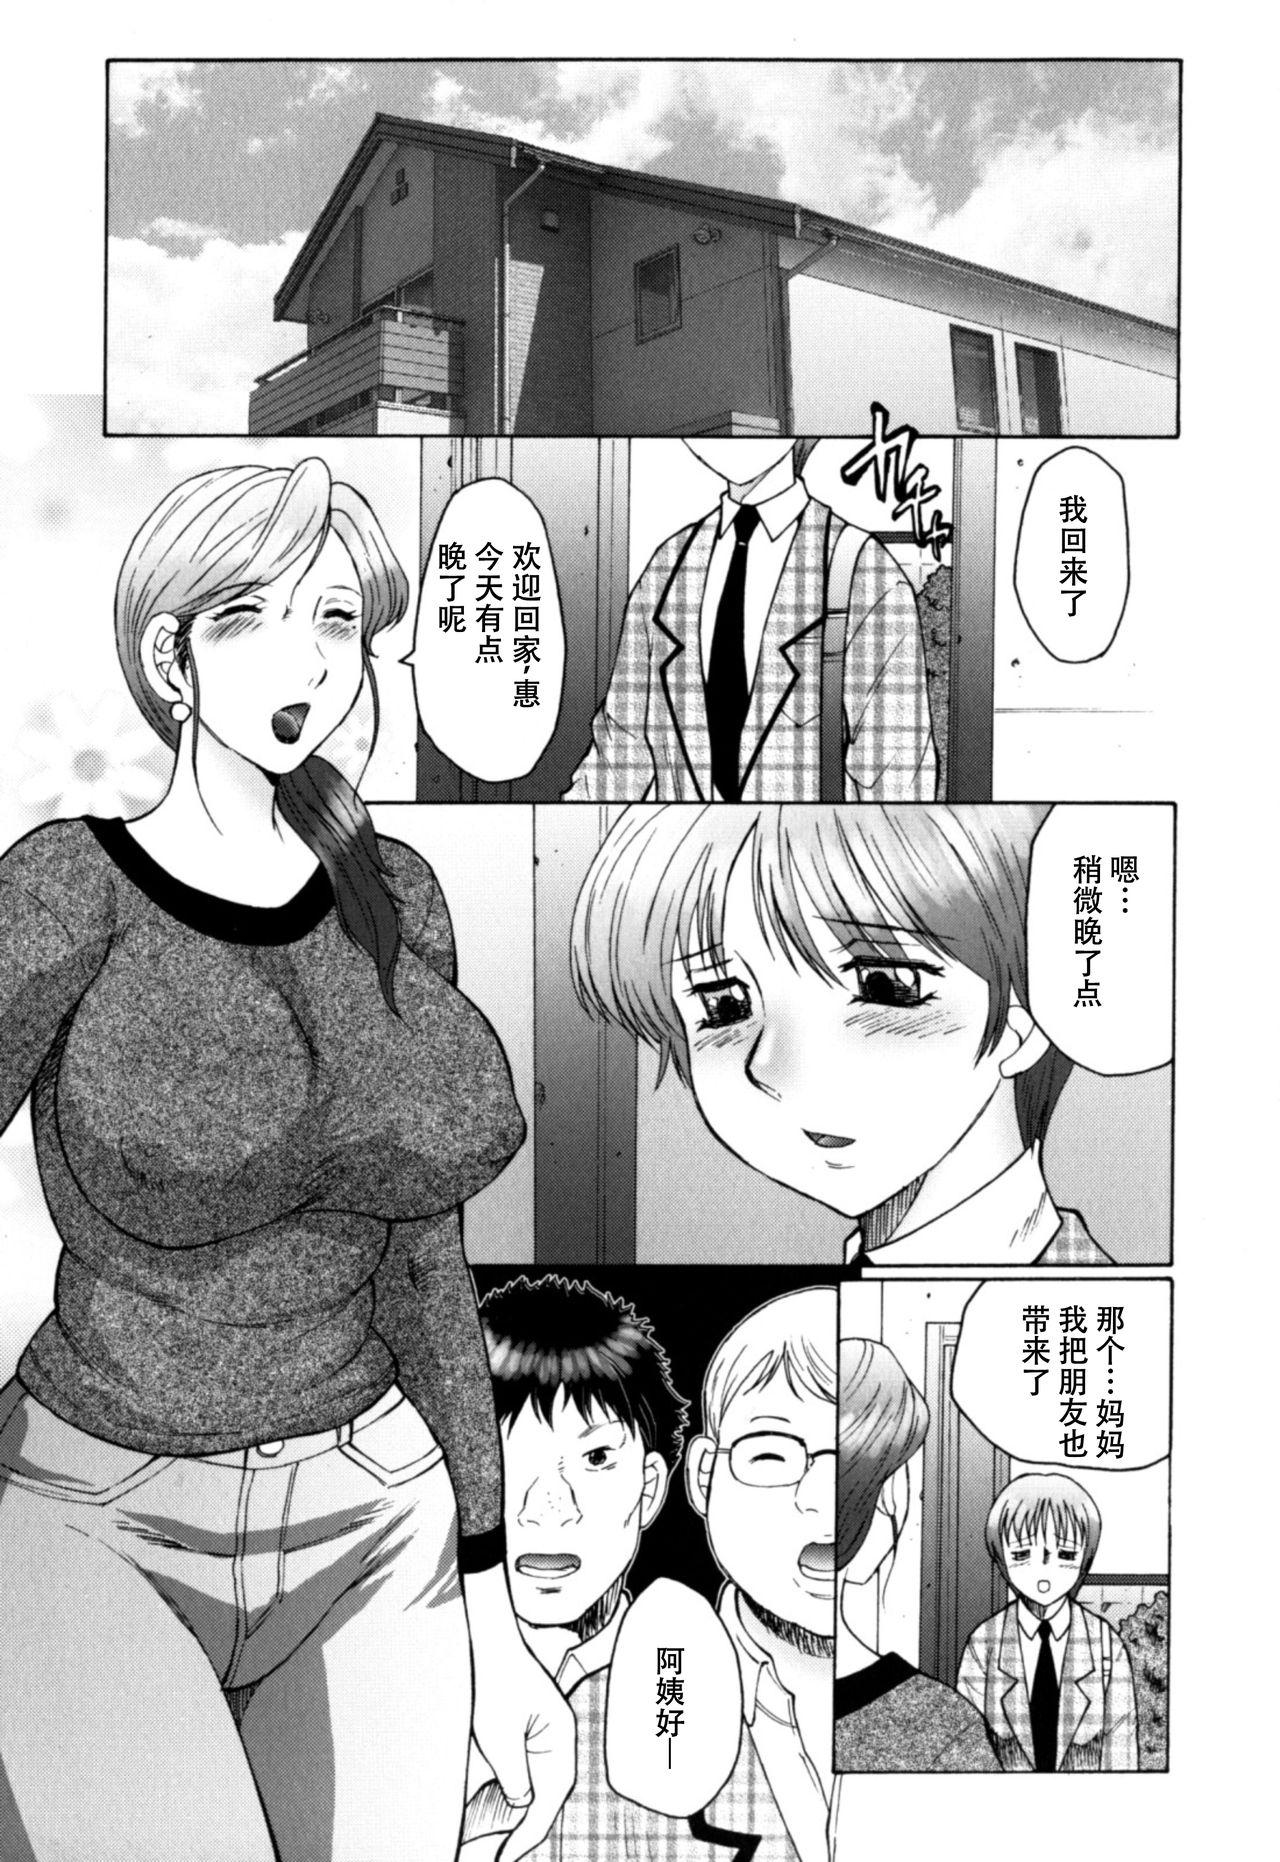 Glamour Porn [Fuusen Club] Haha Mamire Ch. 1 [Chinese]【不可视汉化】 Twinks - Page 4